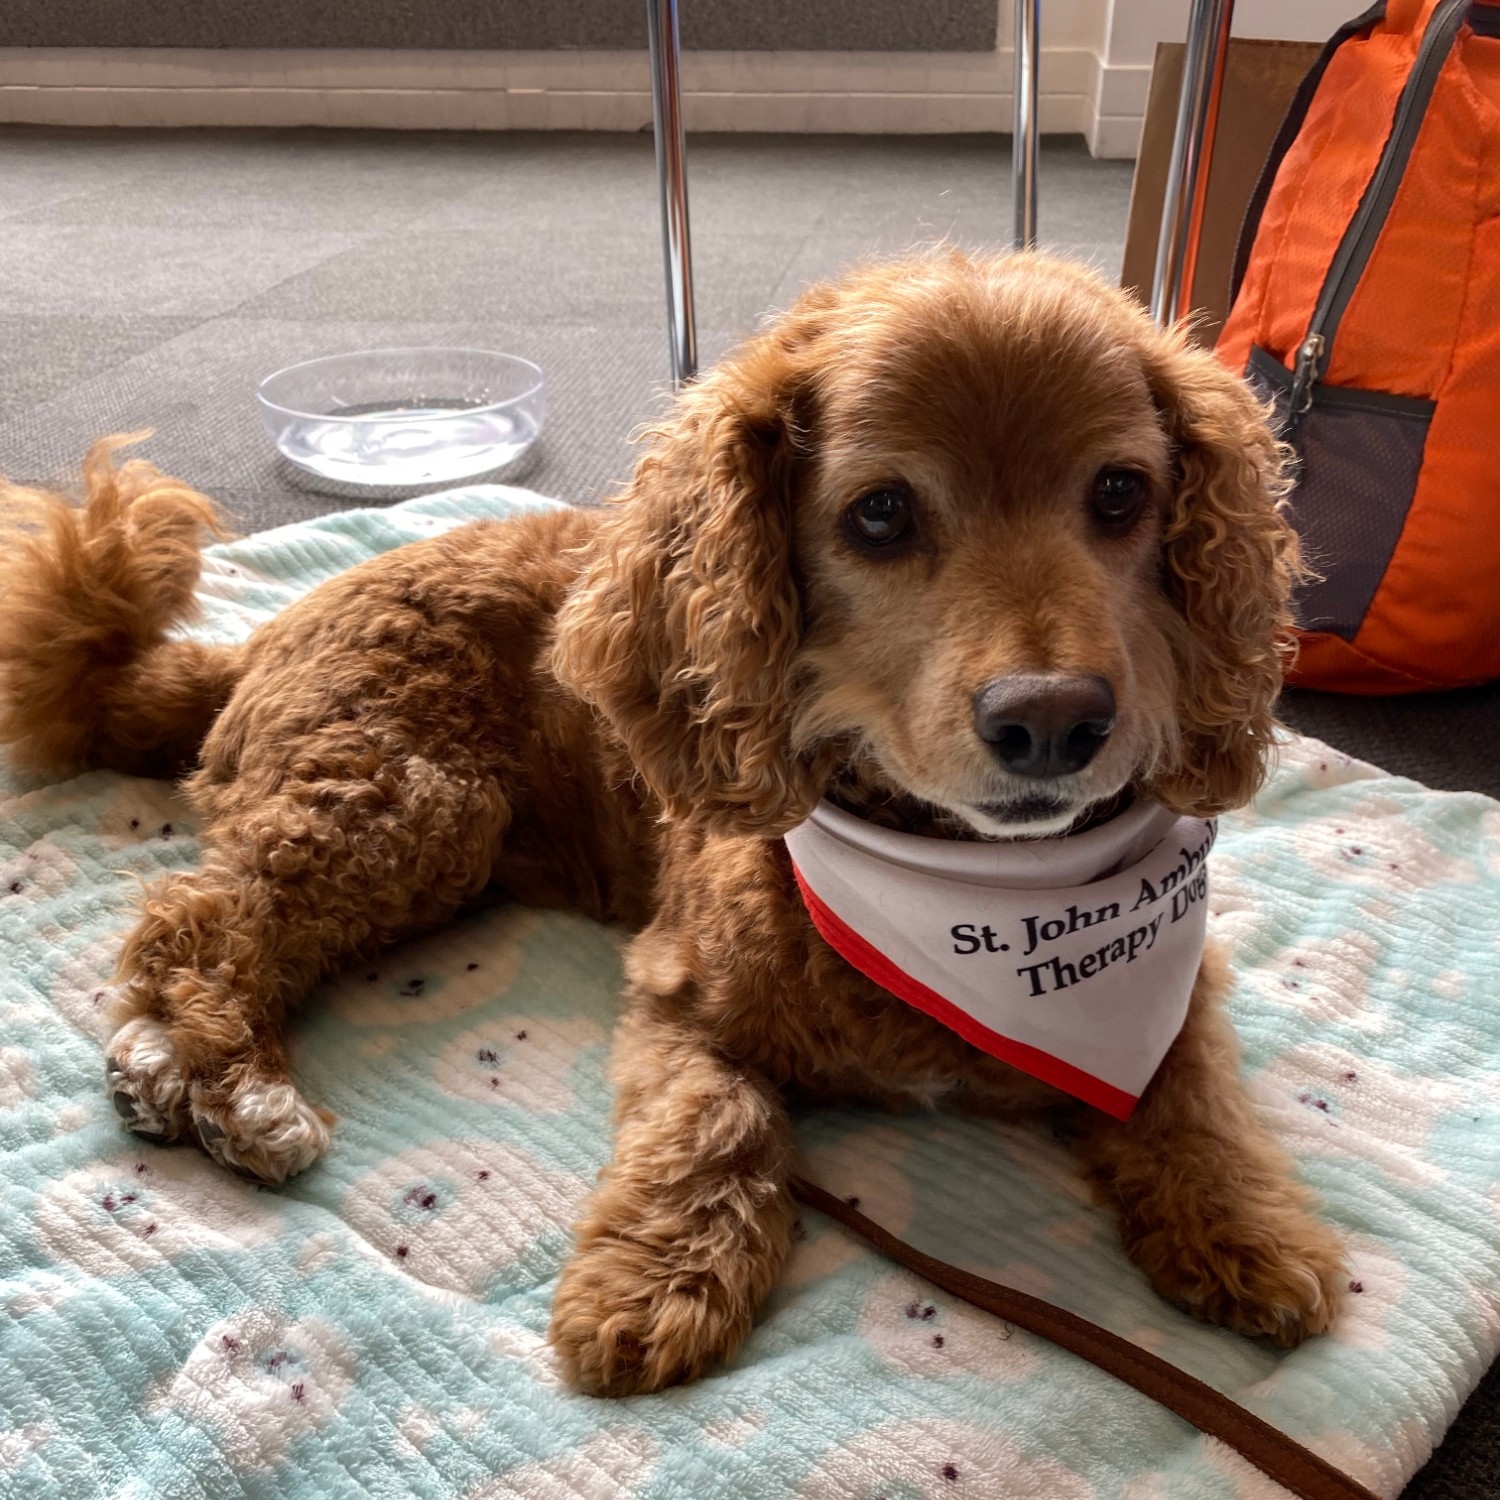 Toby, a small caramel coloured dog, laying on a blanket and wearing a St. John's Ambulance bandana at Dog Therapy event 